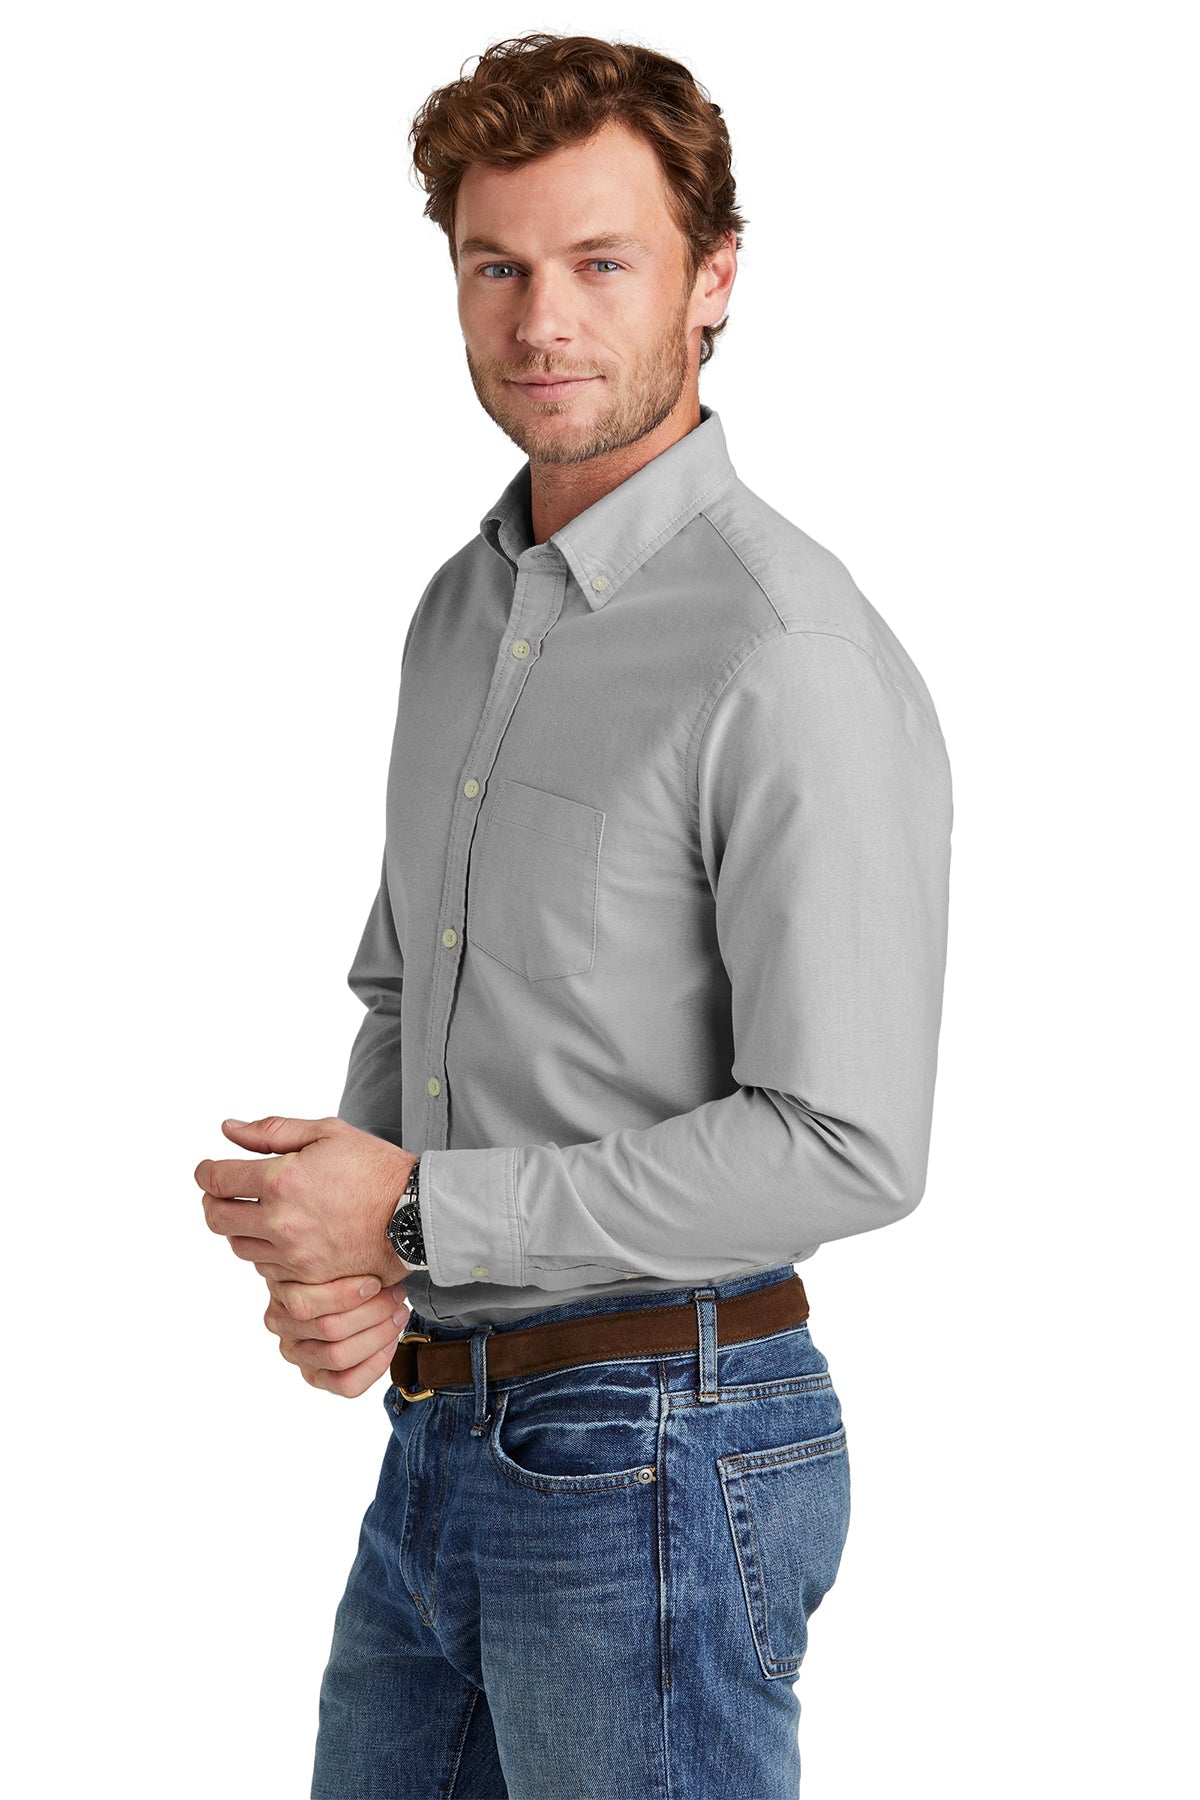 Brooks Brothers Casual Oxford Cloth Shirt, Windsor Grey